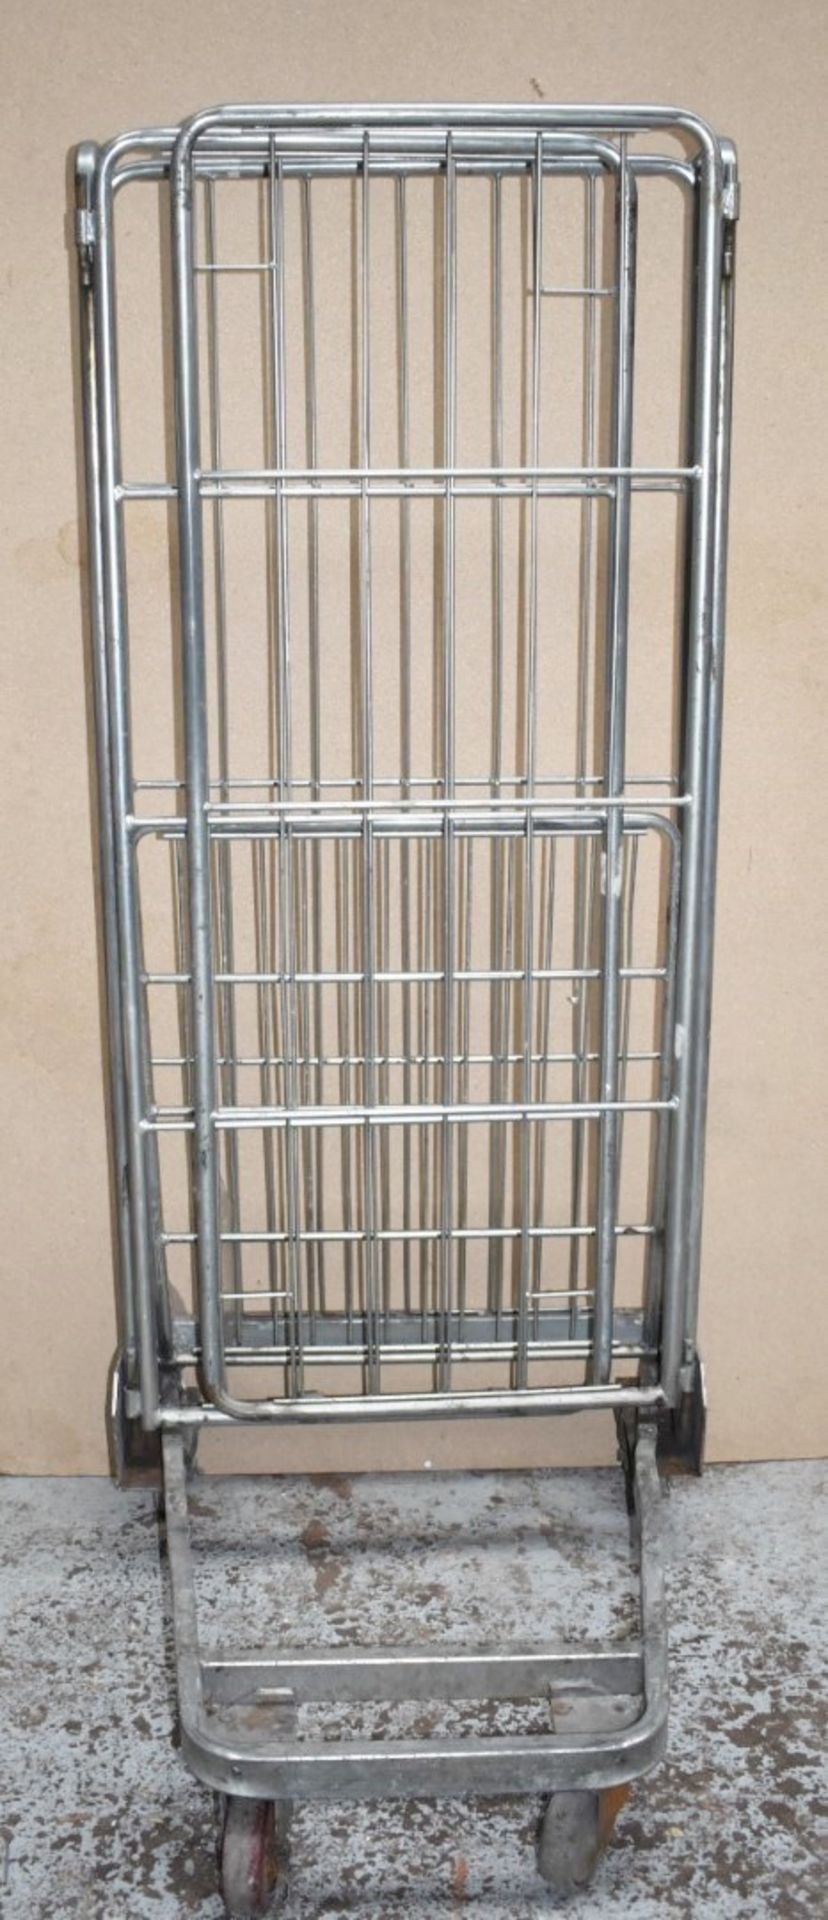 4 x Roller Cages With Heavy Duty Castors - Demountable With Three Sides - Ideal For Storing and - Image 8 of 11